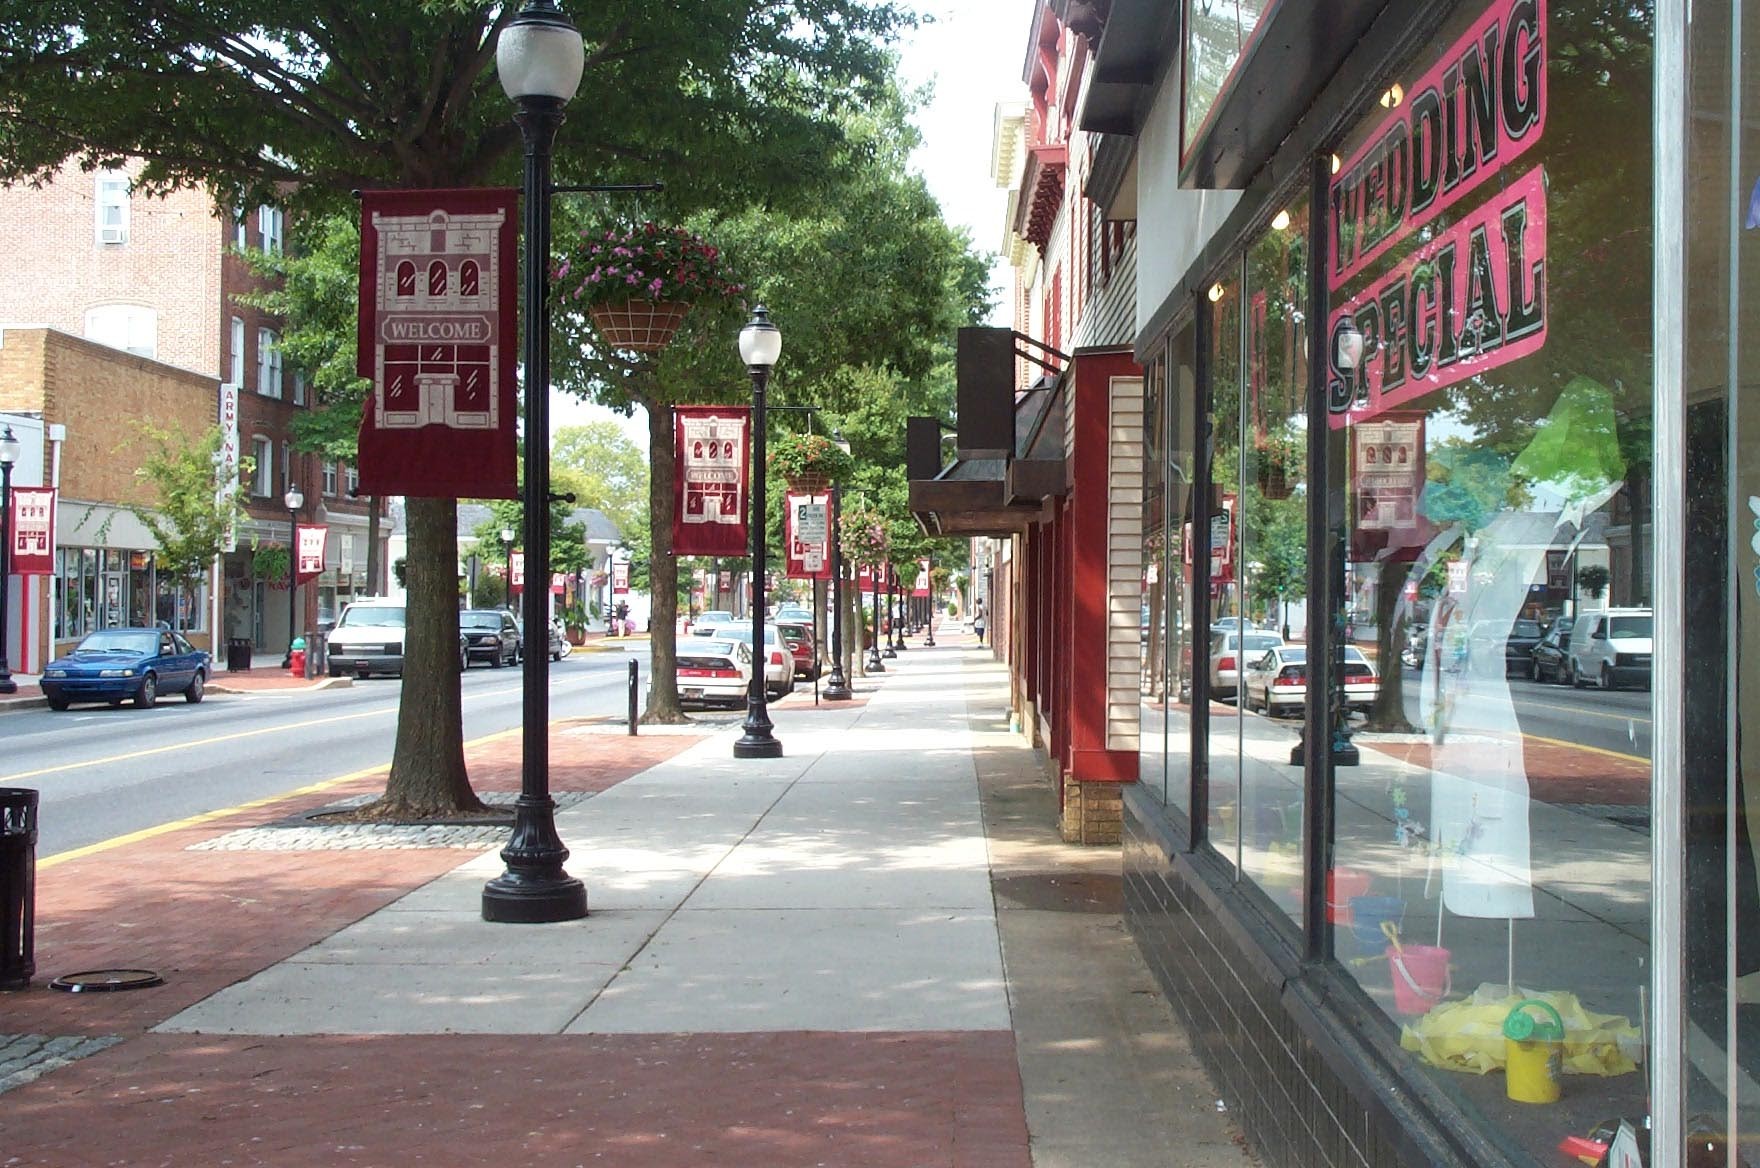 Did you know more than 98% of businesses in Delaware are small businesses?